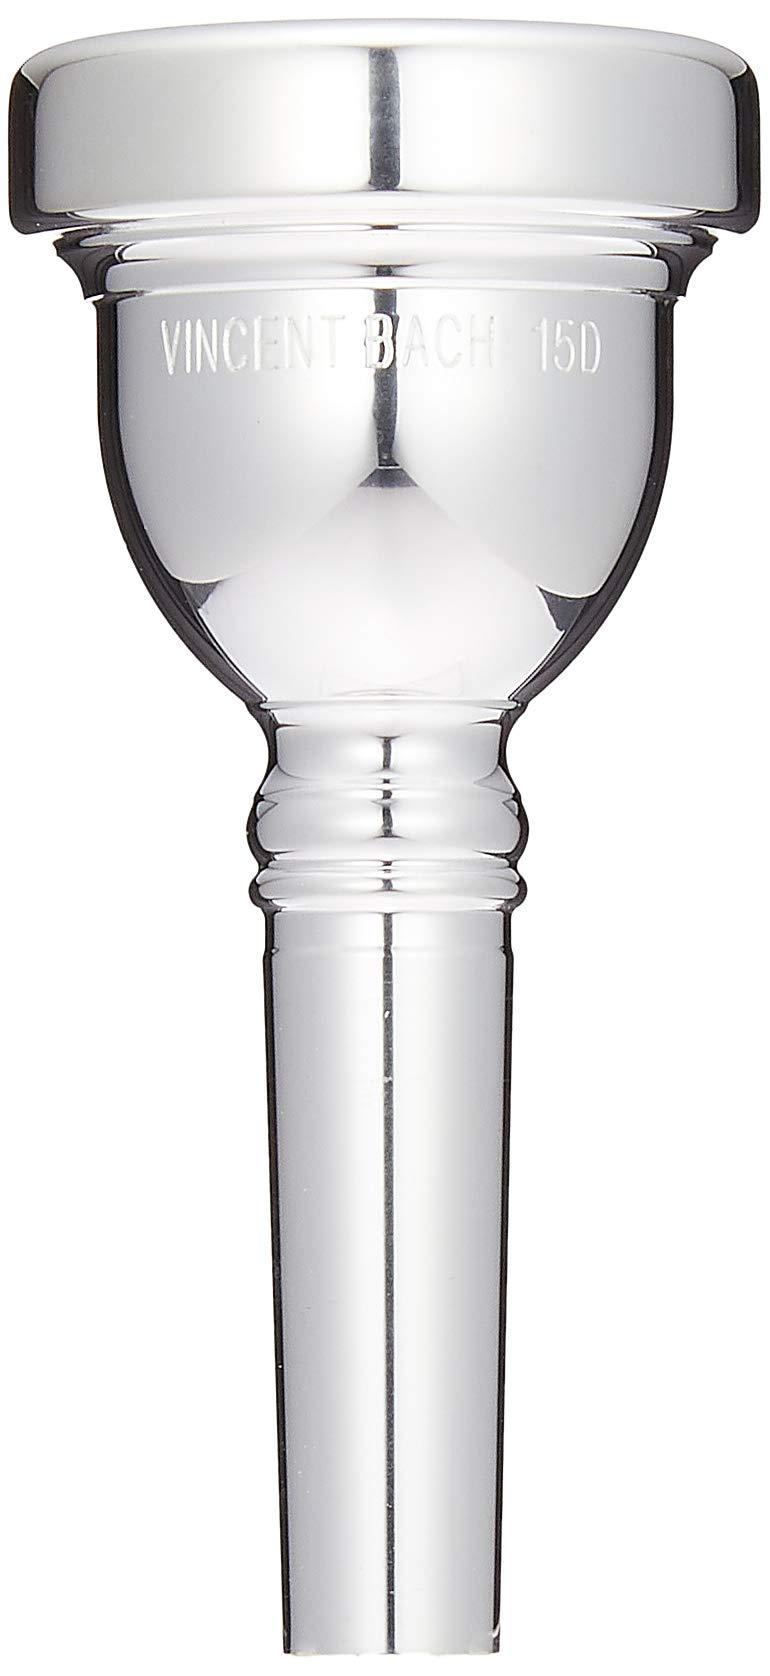 Bach 35015D Small Shank Tenor Trombone Mouthpiece, Silver Plated, 15D Cup Shallow